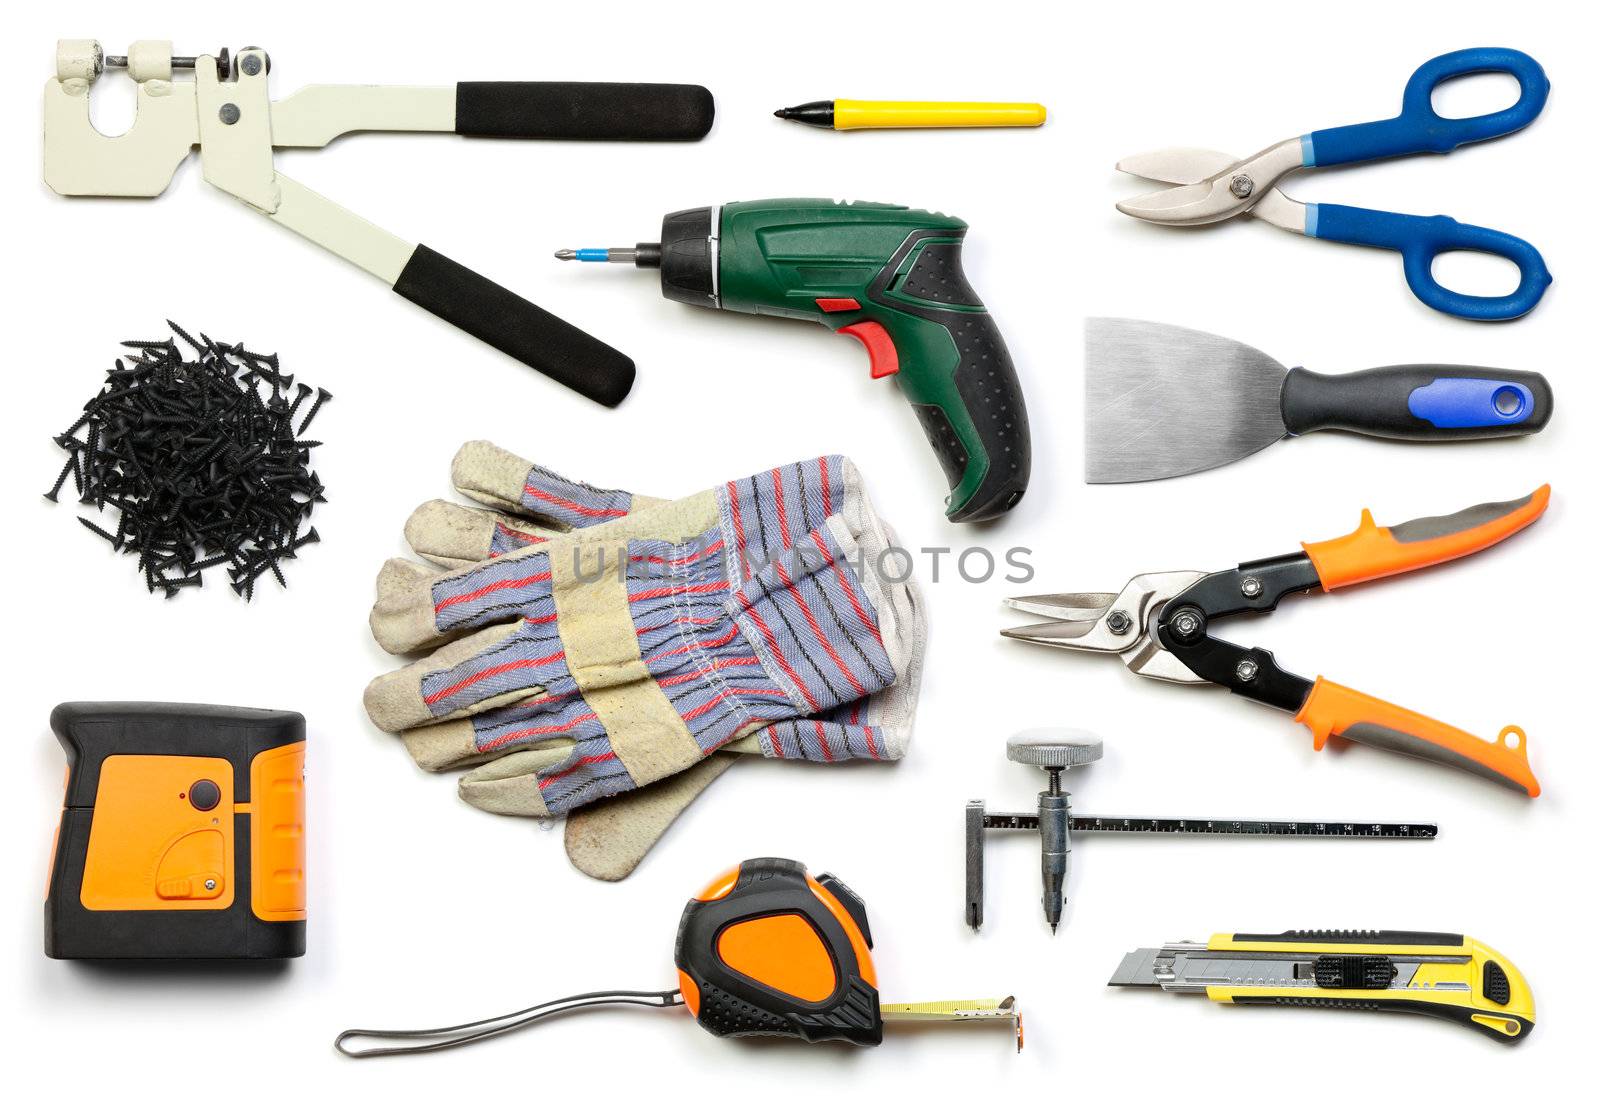 Plasterboard tools set with punch lock crimper, marker pen, tin snip cutter, screws, screw gun, plaster spreader, protective gloves, laser level, tape measure and circle cutter on white background